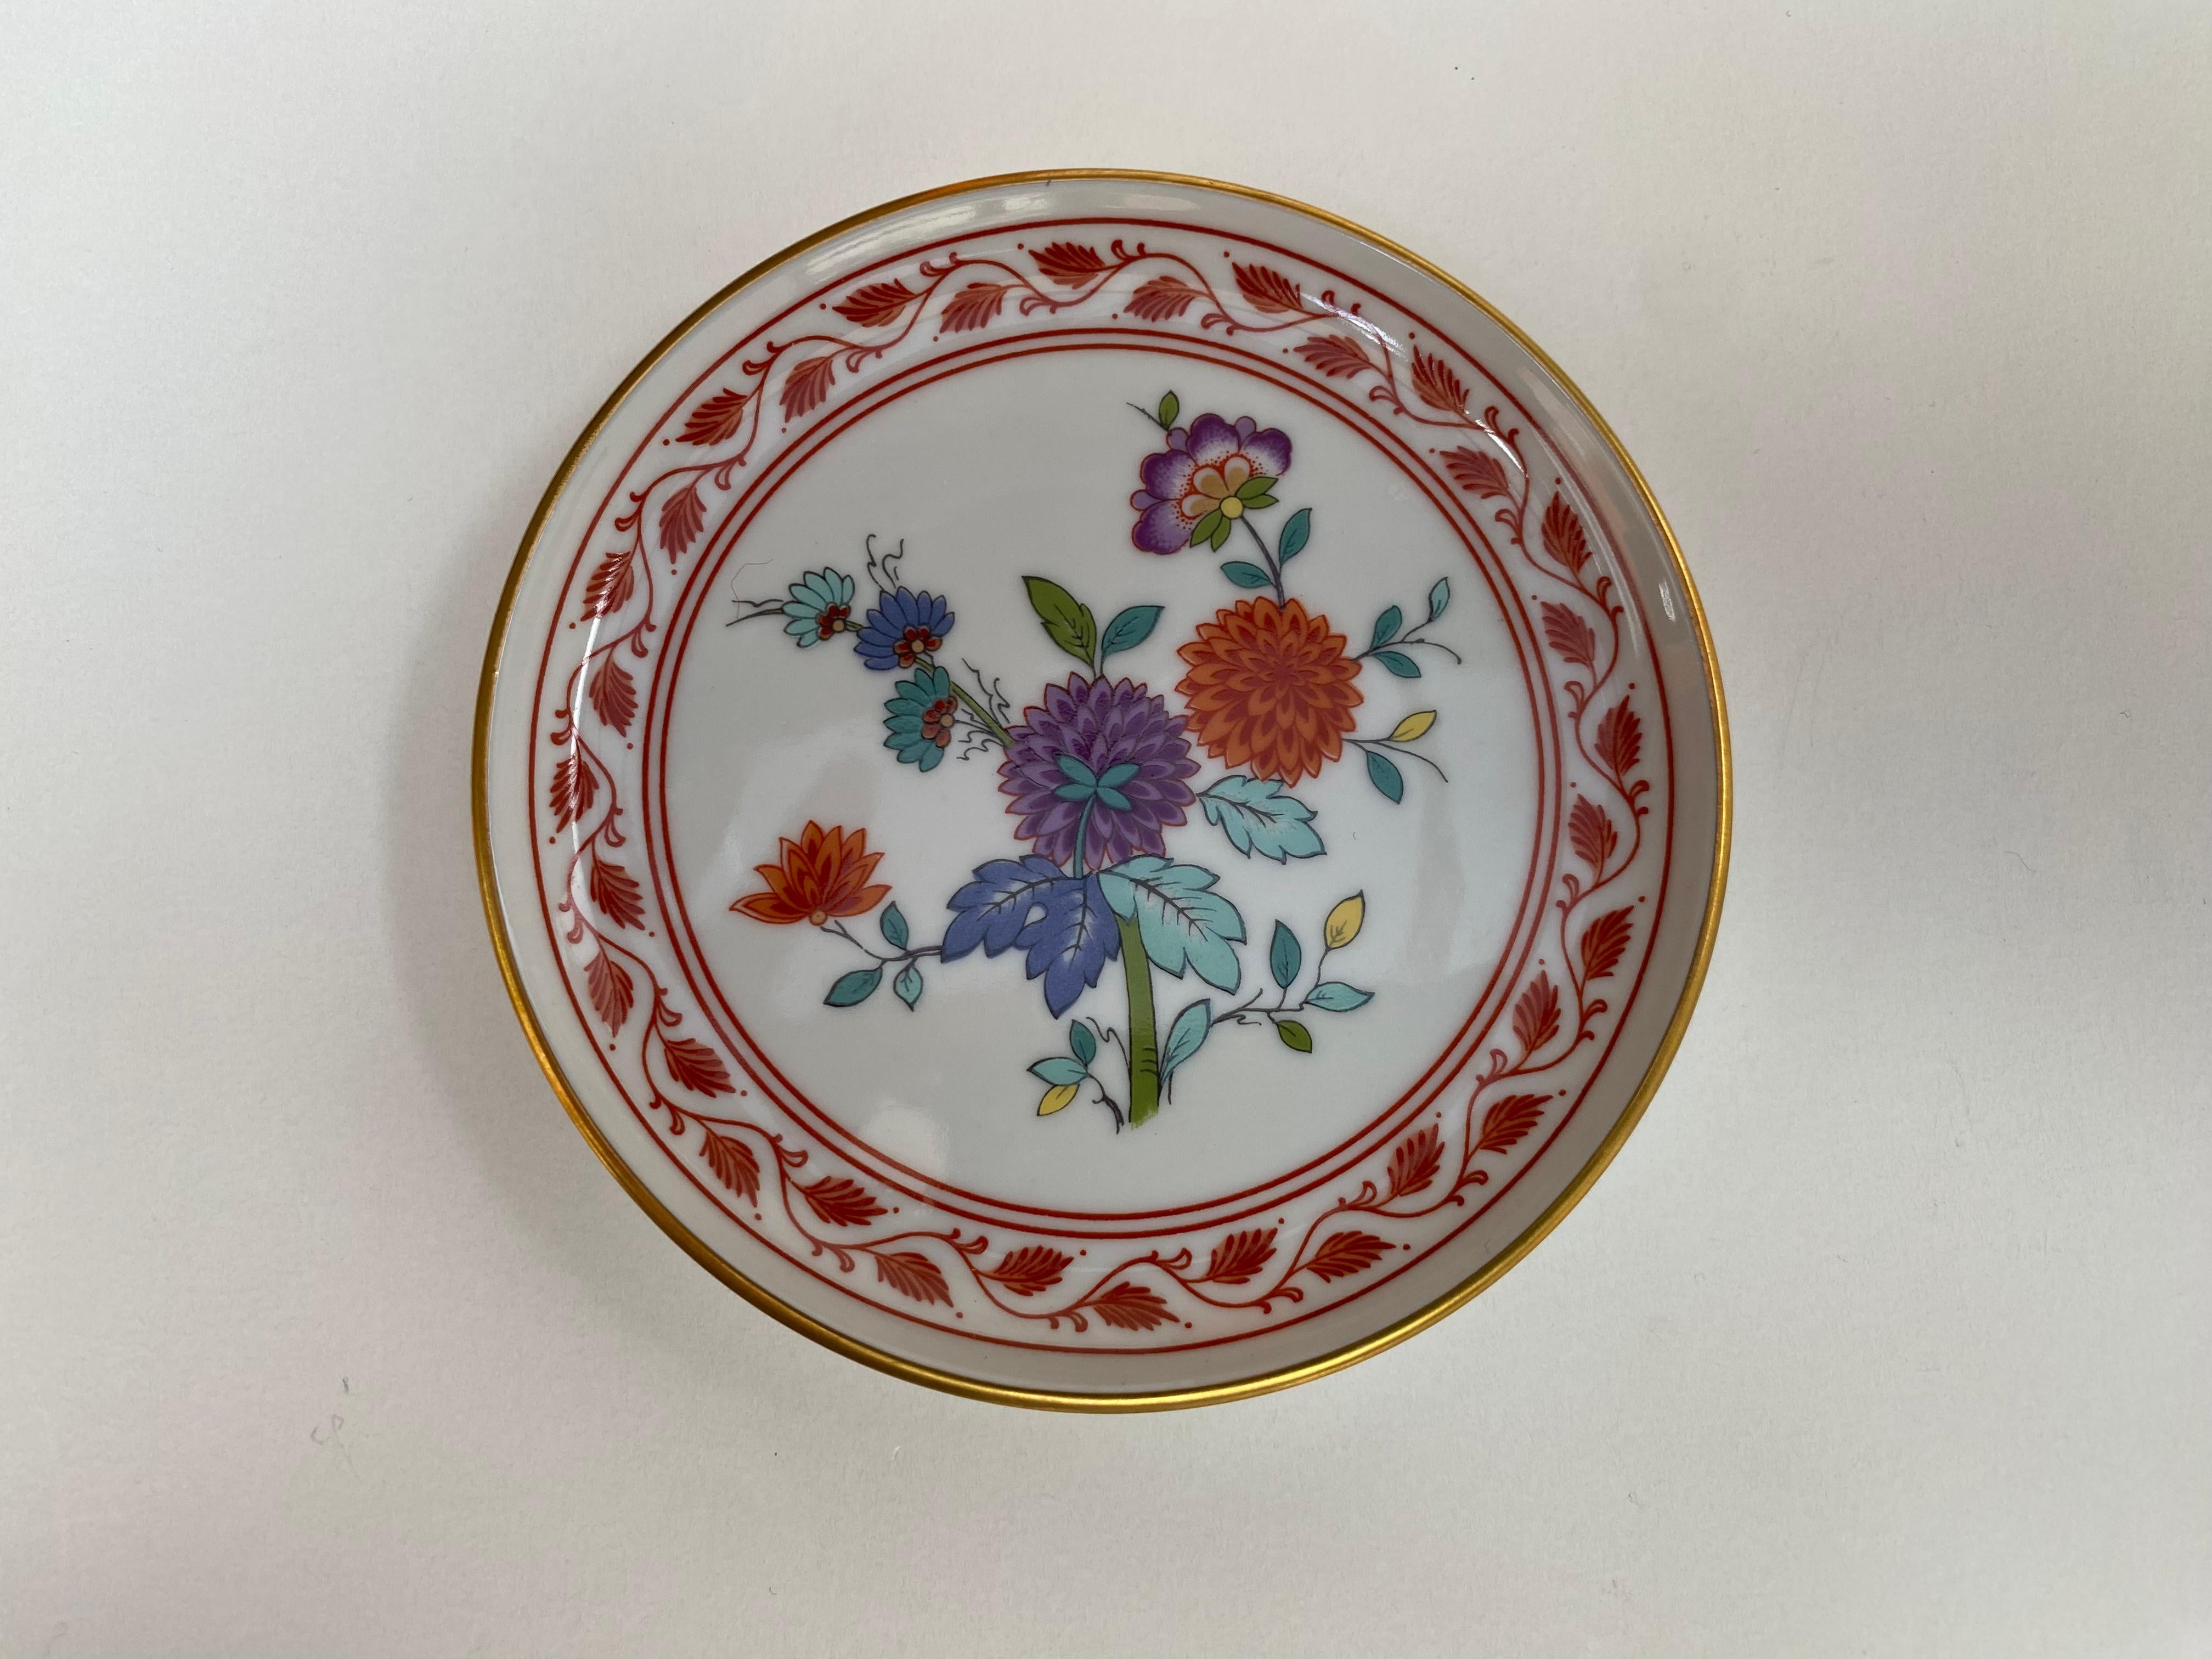 AK Kaiser West Germany Porcelain covered plates ‘Taijuan’ Pattern, 1970.

The set consists of 6 pieces.

Stamped and numbered on the back. 

They feature gold rims as well as some gold applied on the flowers inside. The design is called